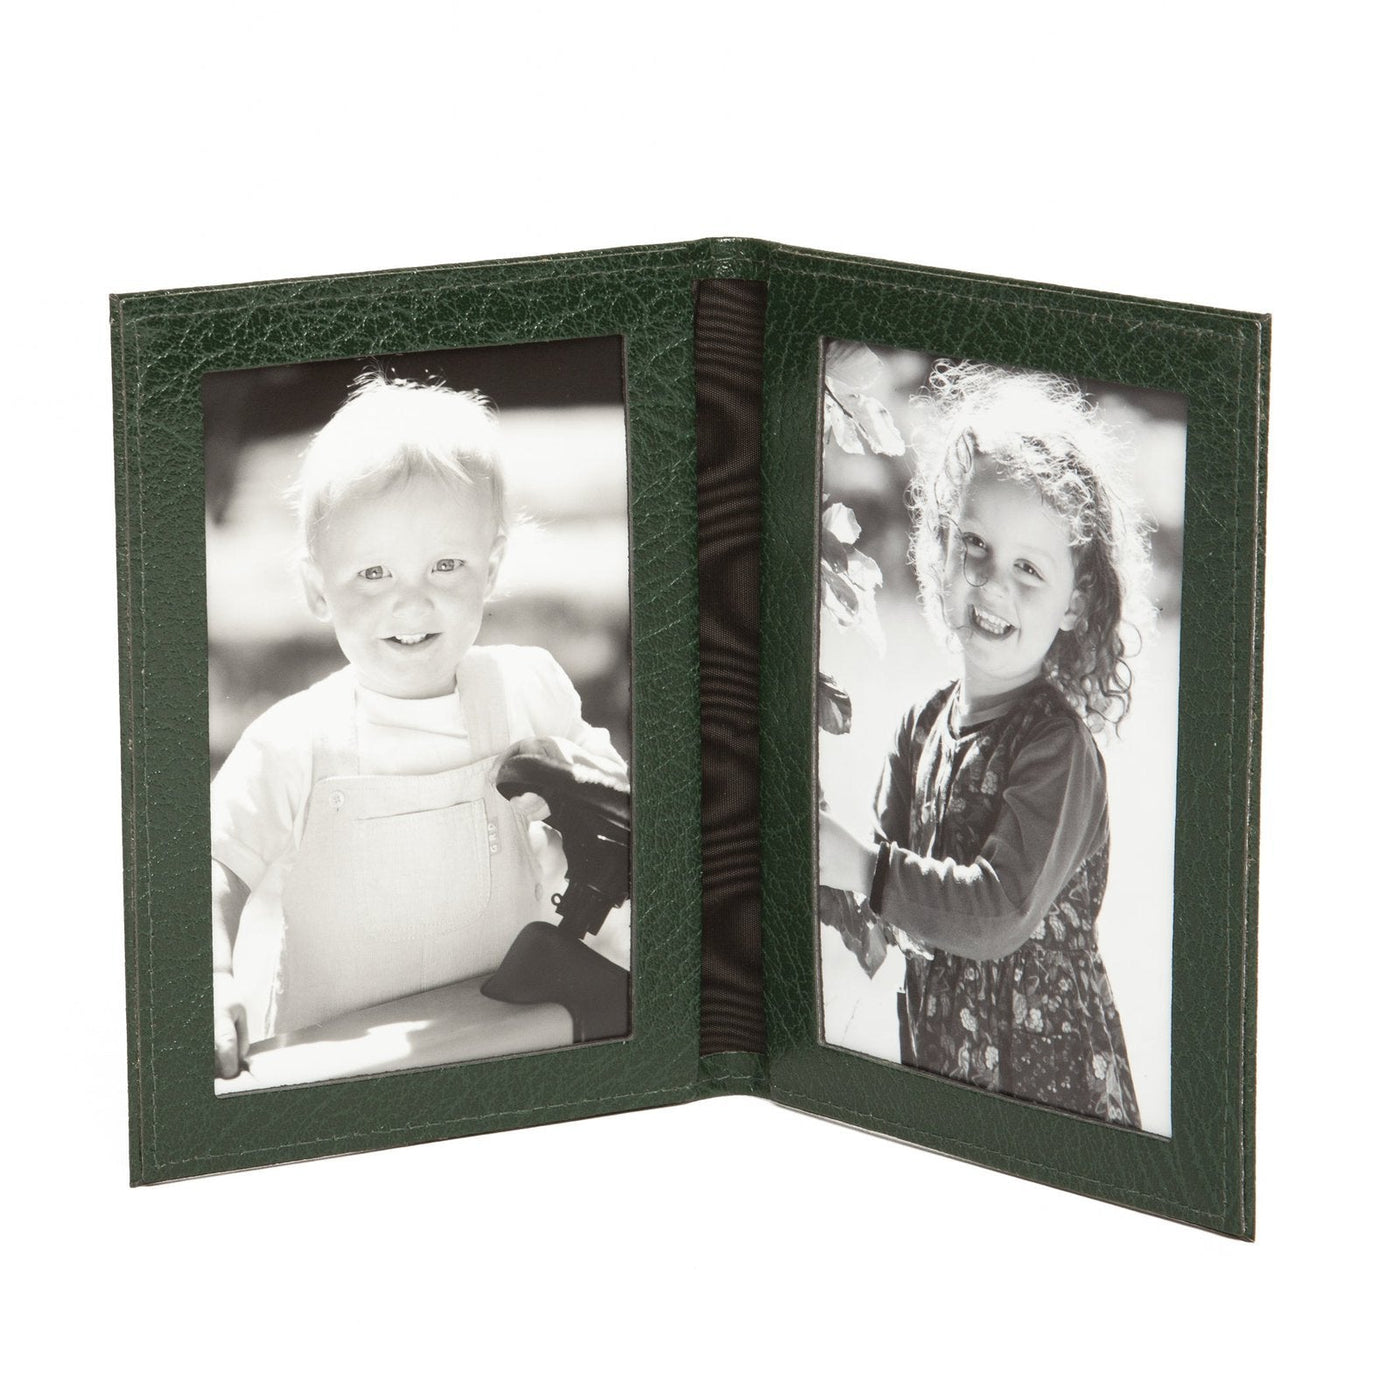 Moroccan Leather Travel Double Photo Frame